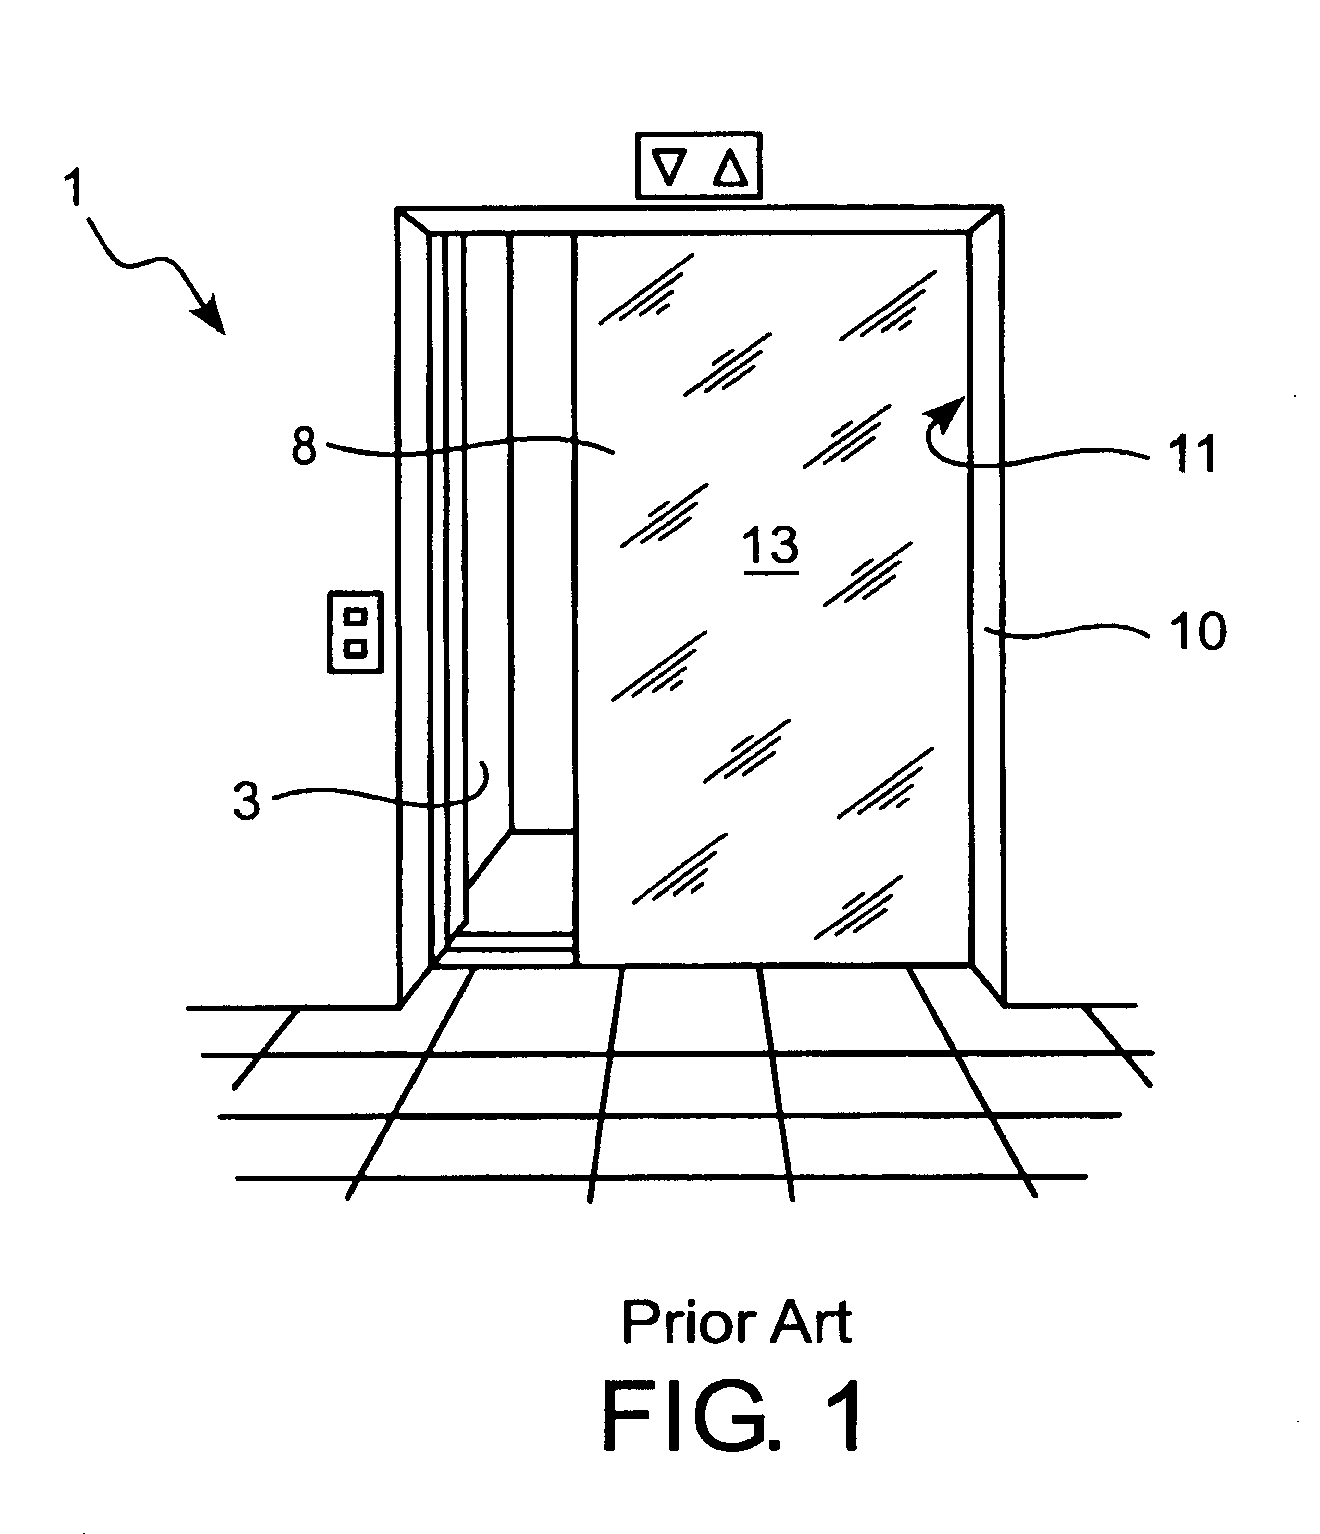 Safety device for pinching zone of elevator doors